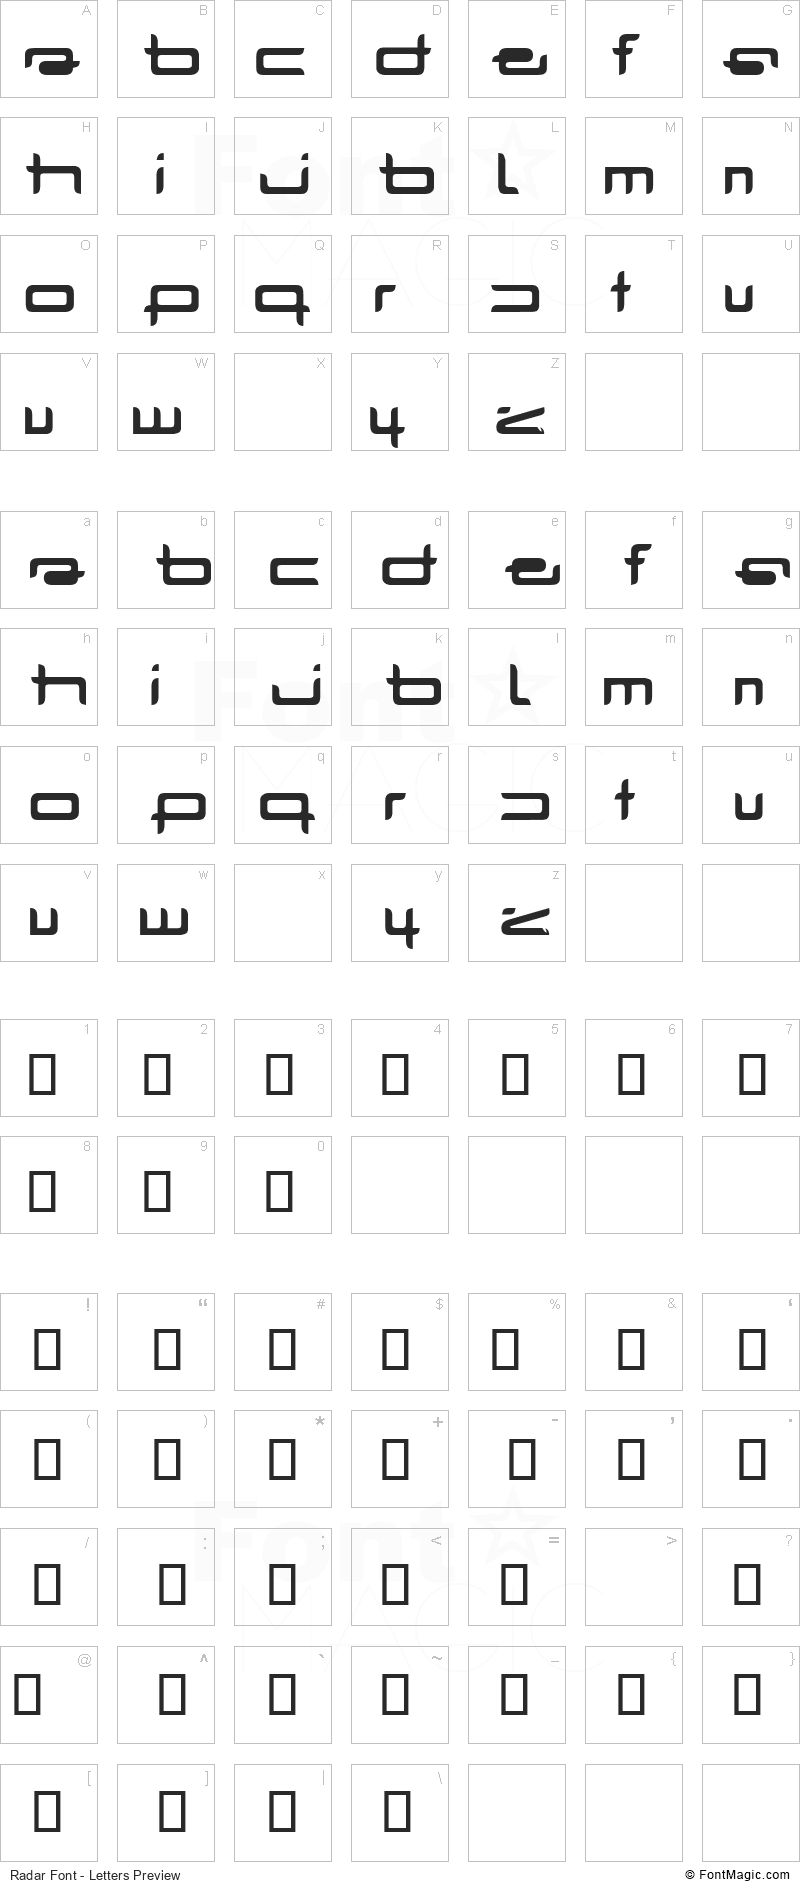 Radar Font - All Latters Preview Chart